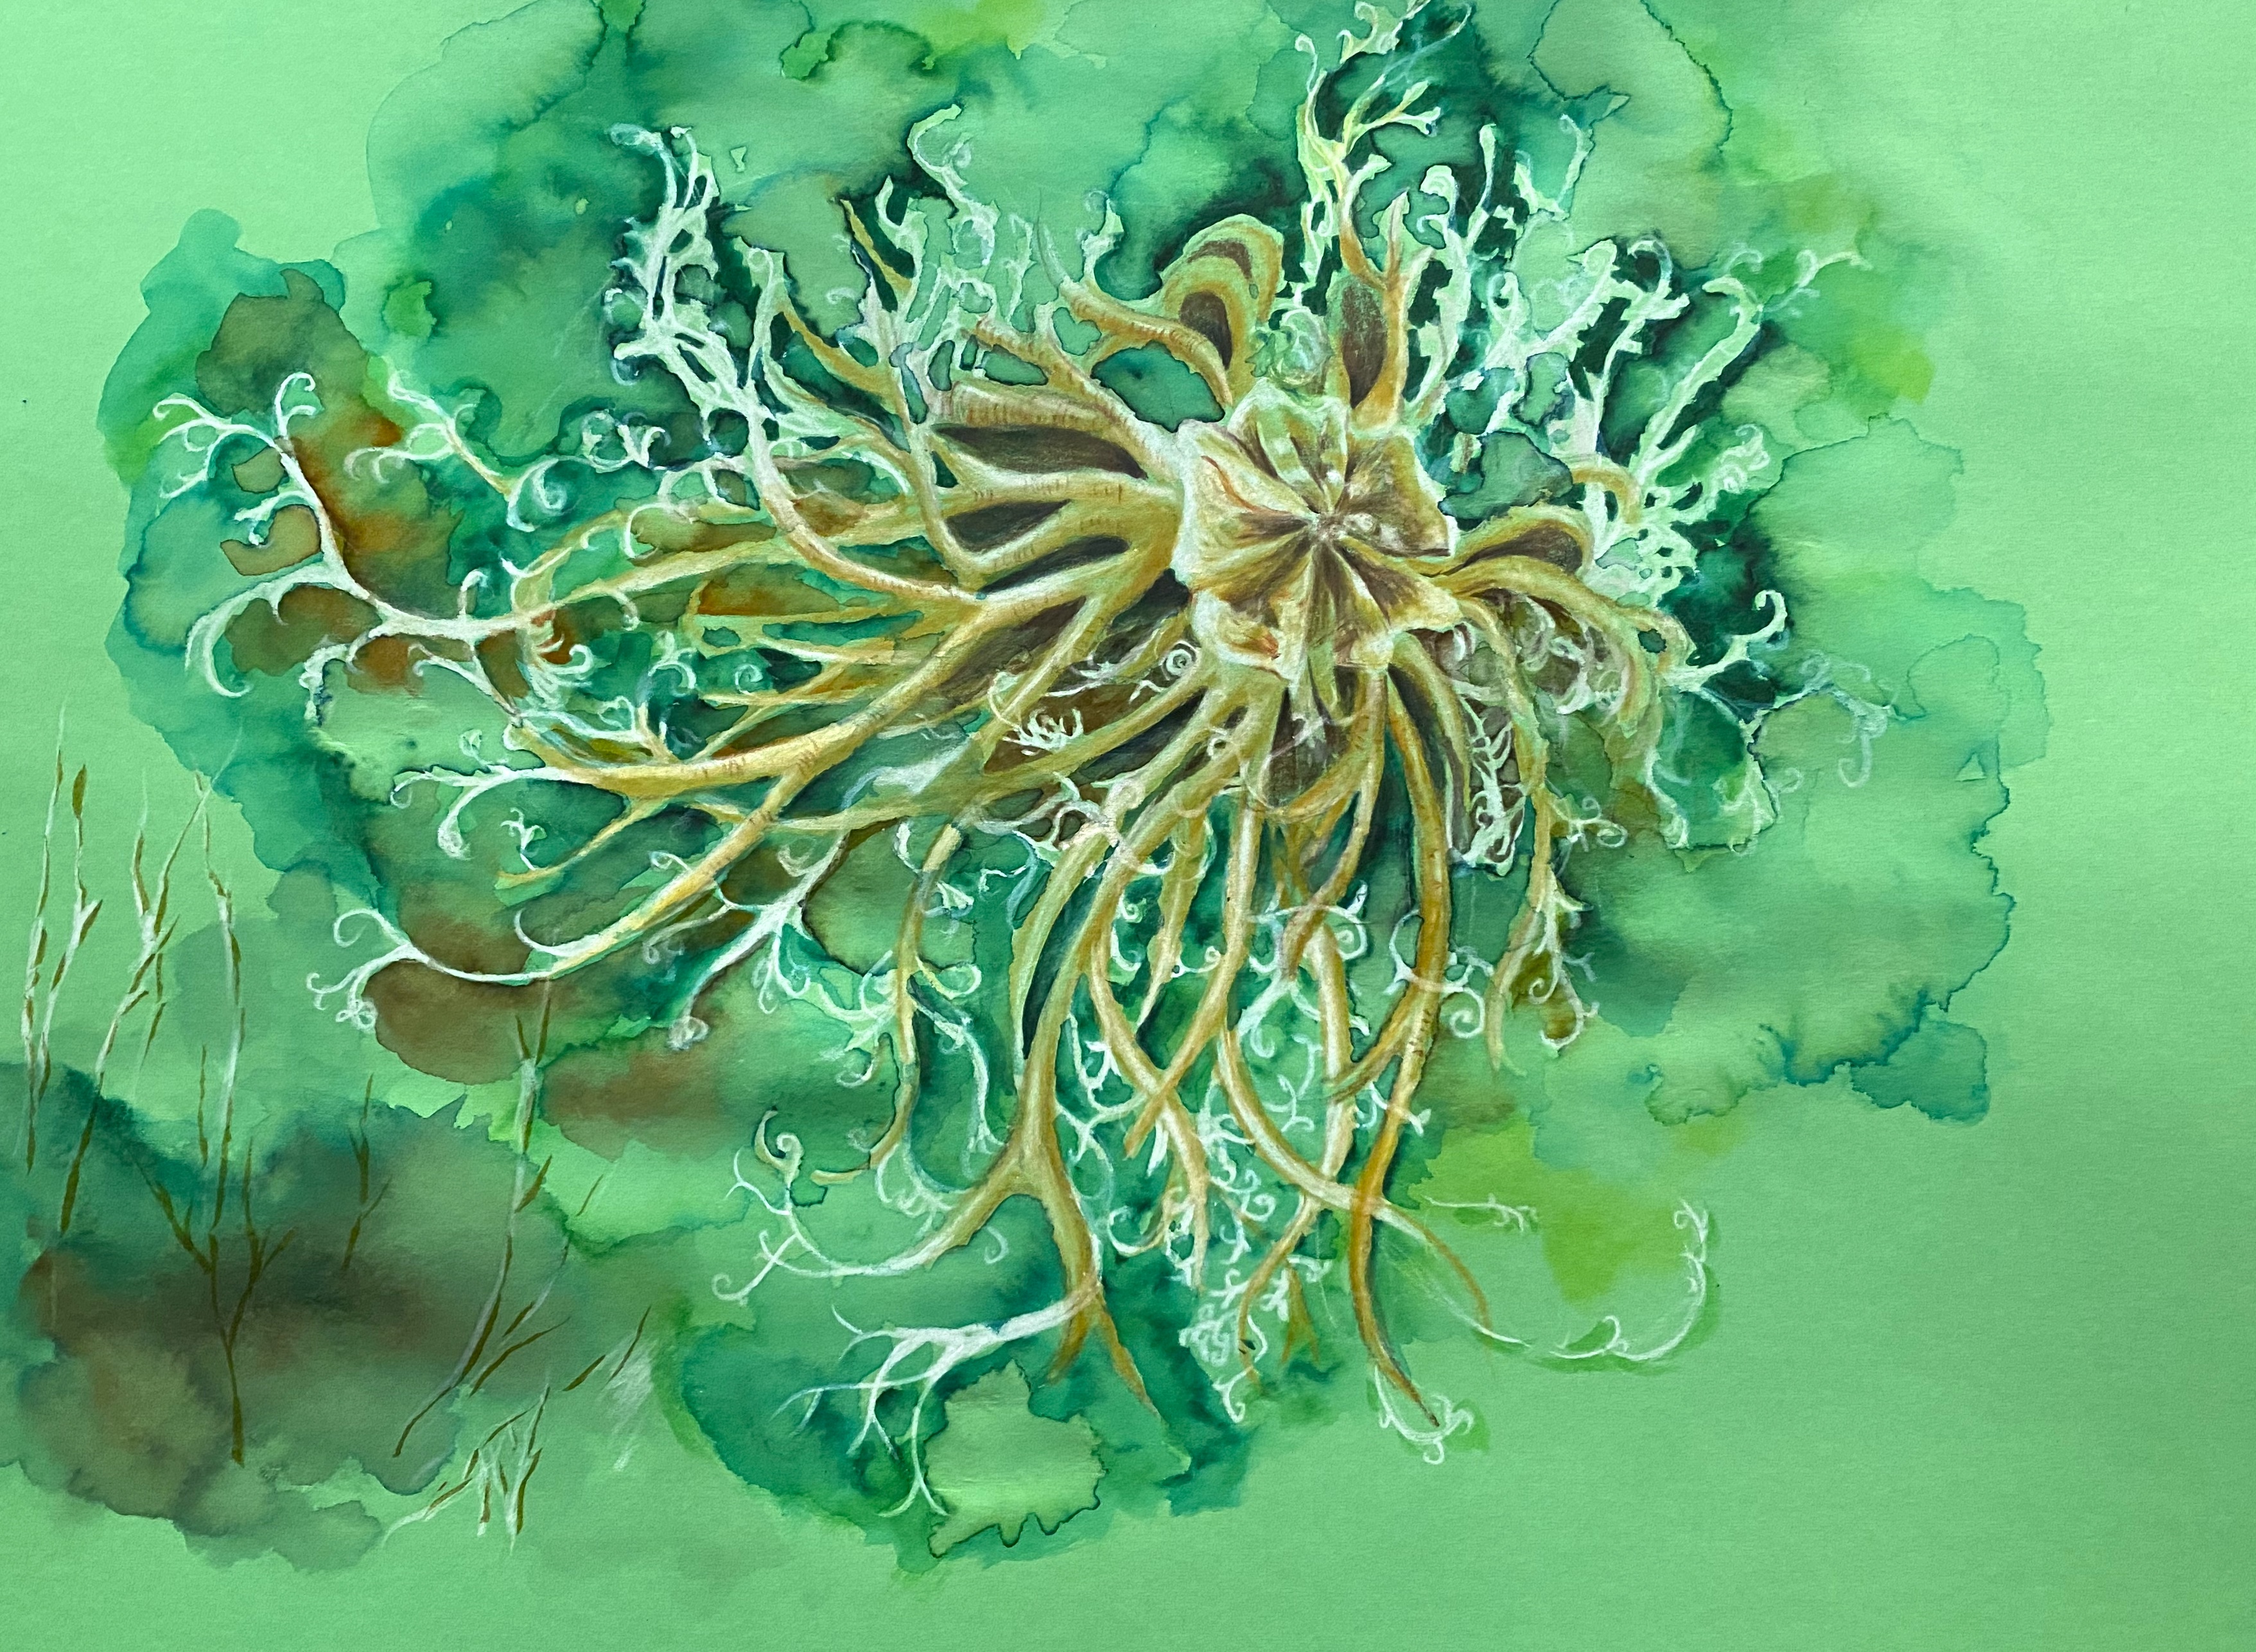 Highly detailed watercolor illustration of a basket star.